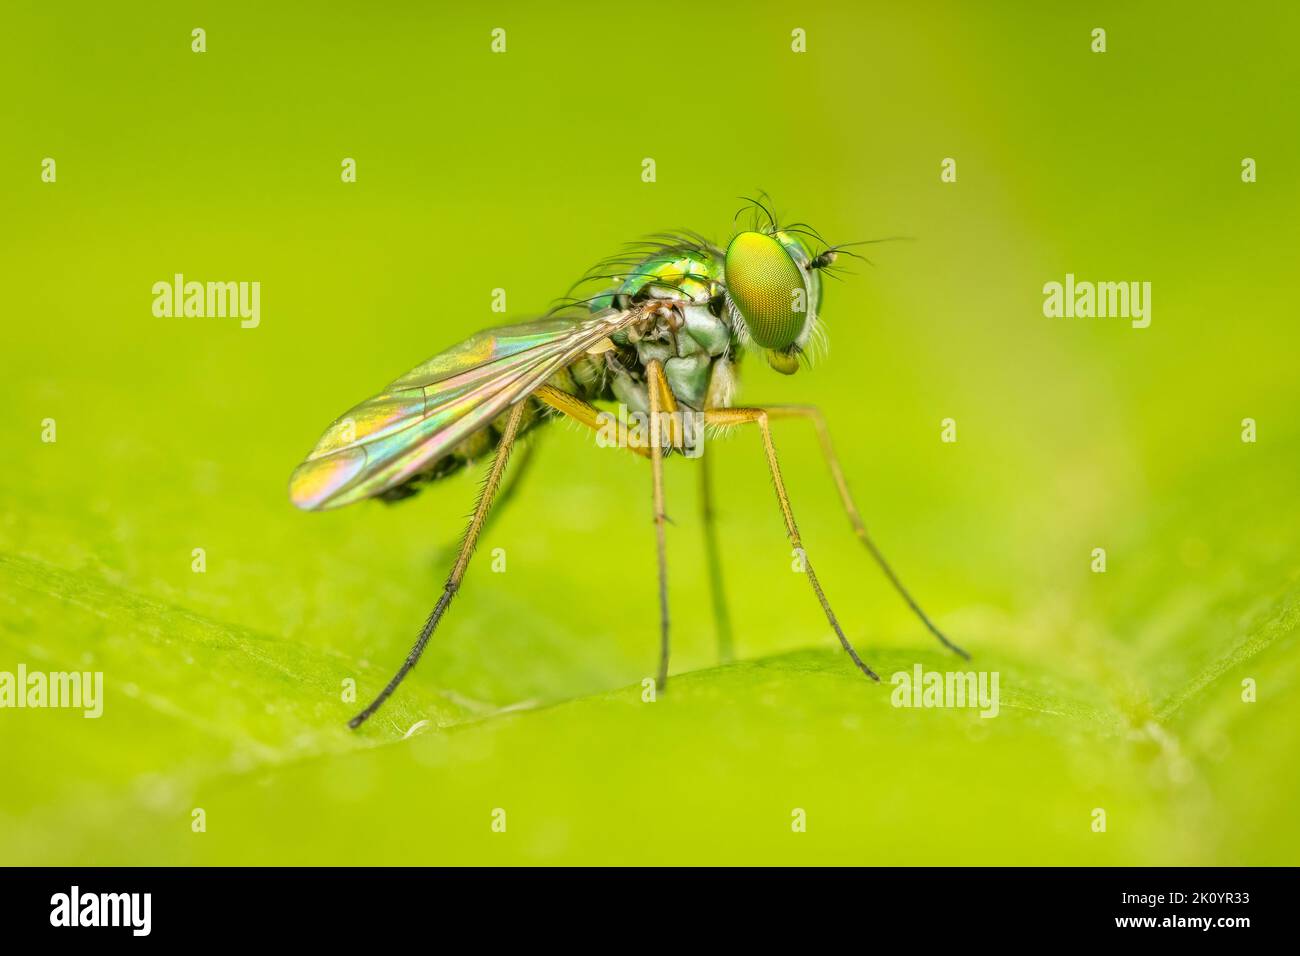 Tiny long legged fly resting on a green blurred background Stock Photo